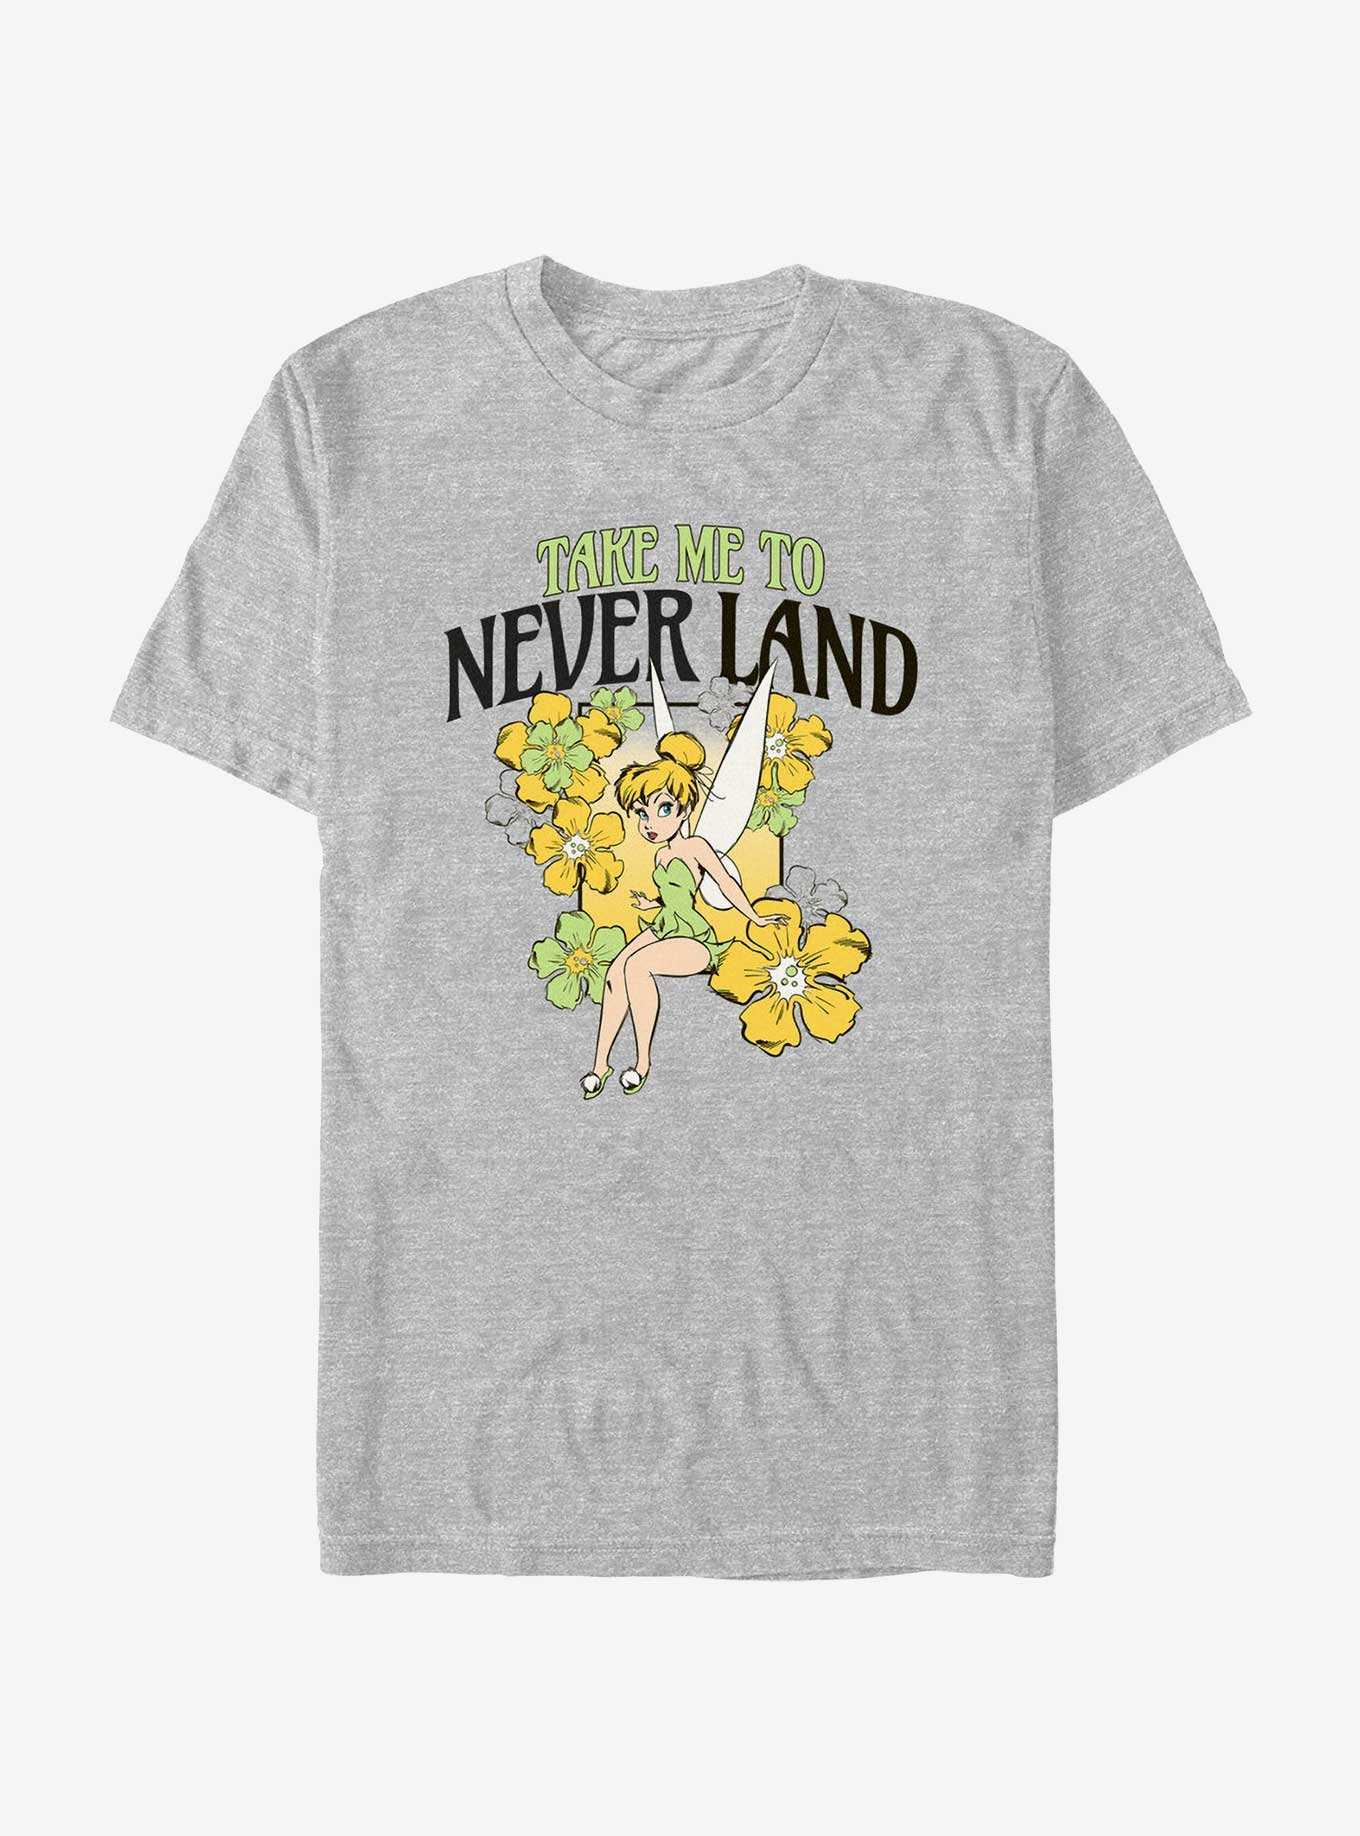 OFFICIAL Peter Pan Merchandise, Shirts & More